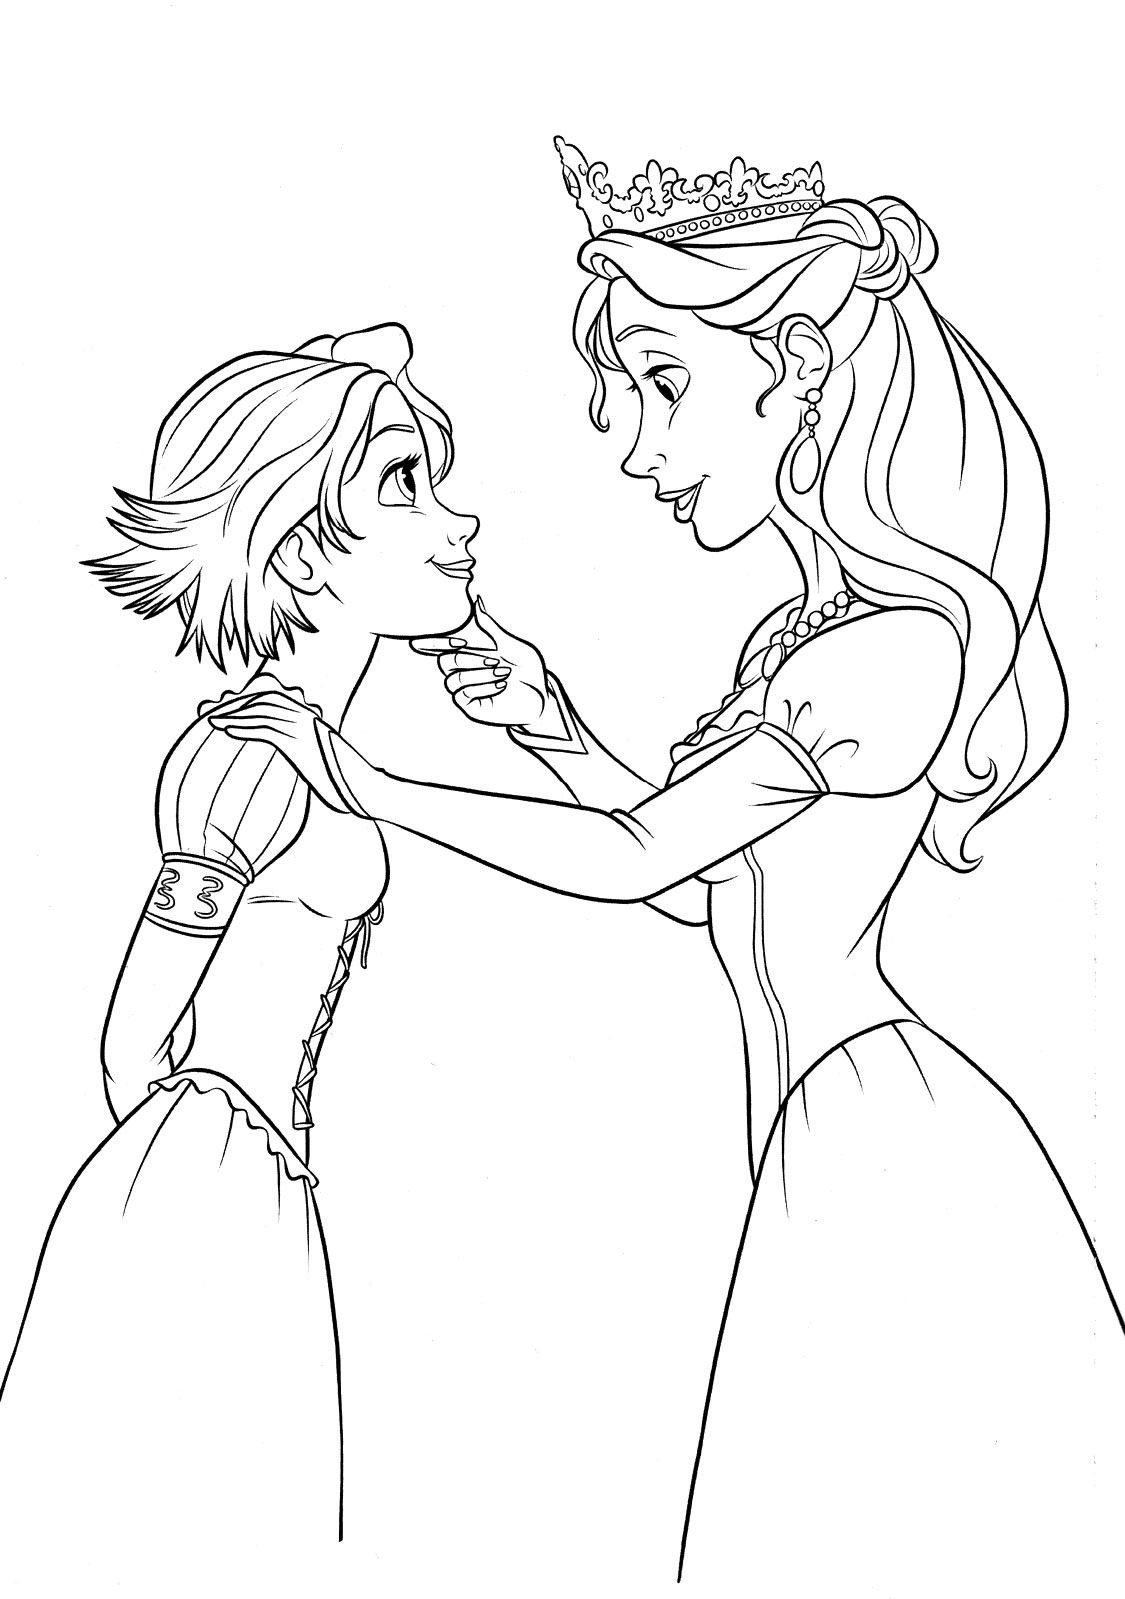 Queen Ariana and Rapunzel Coloring Page